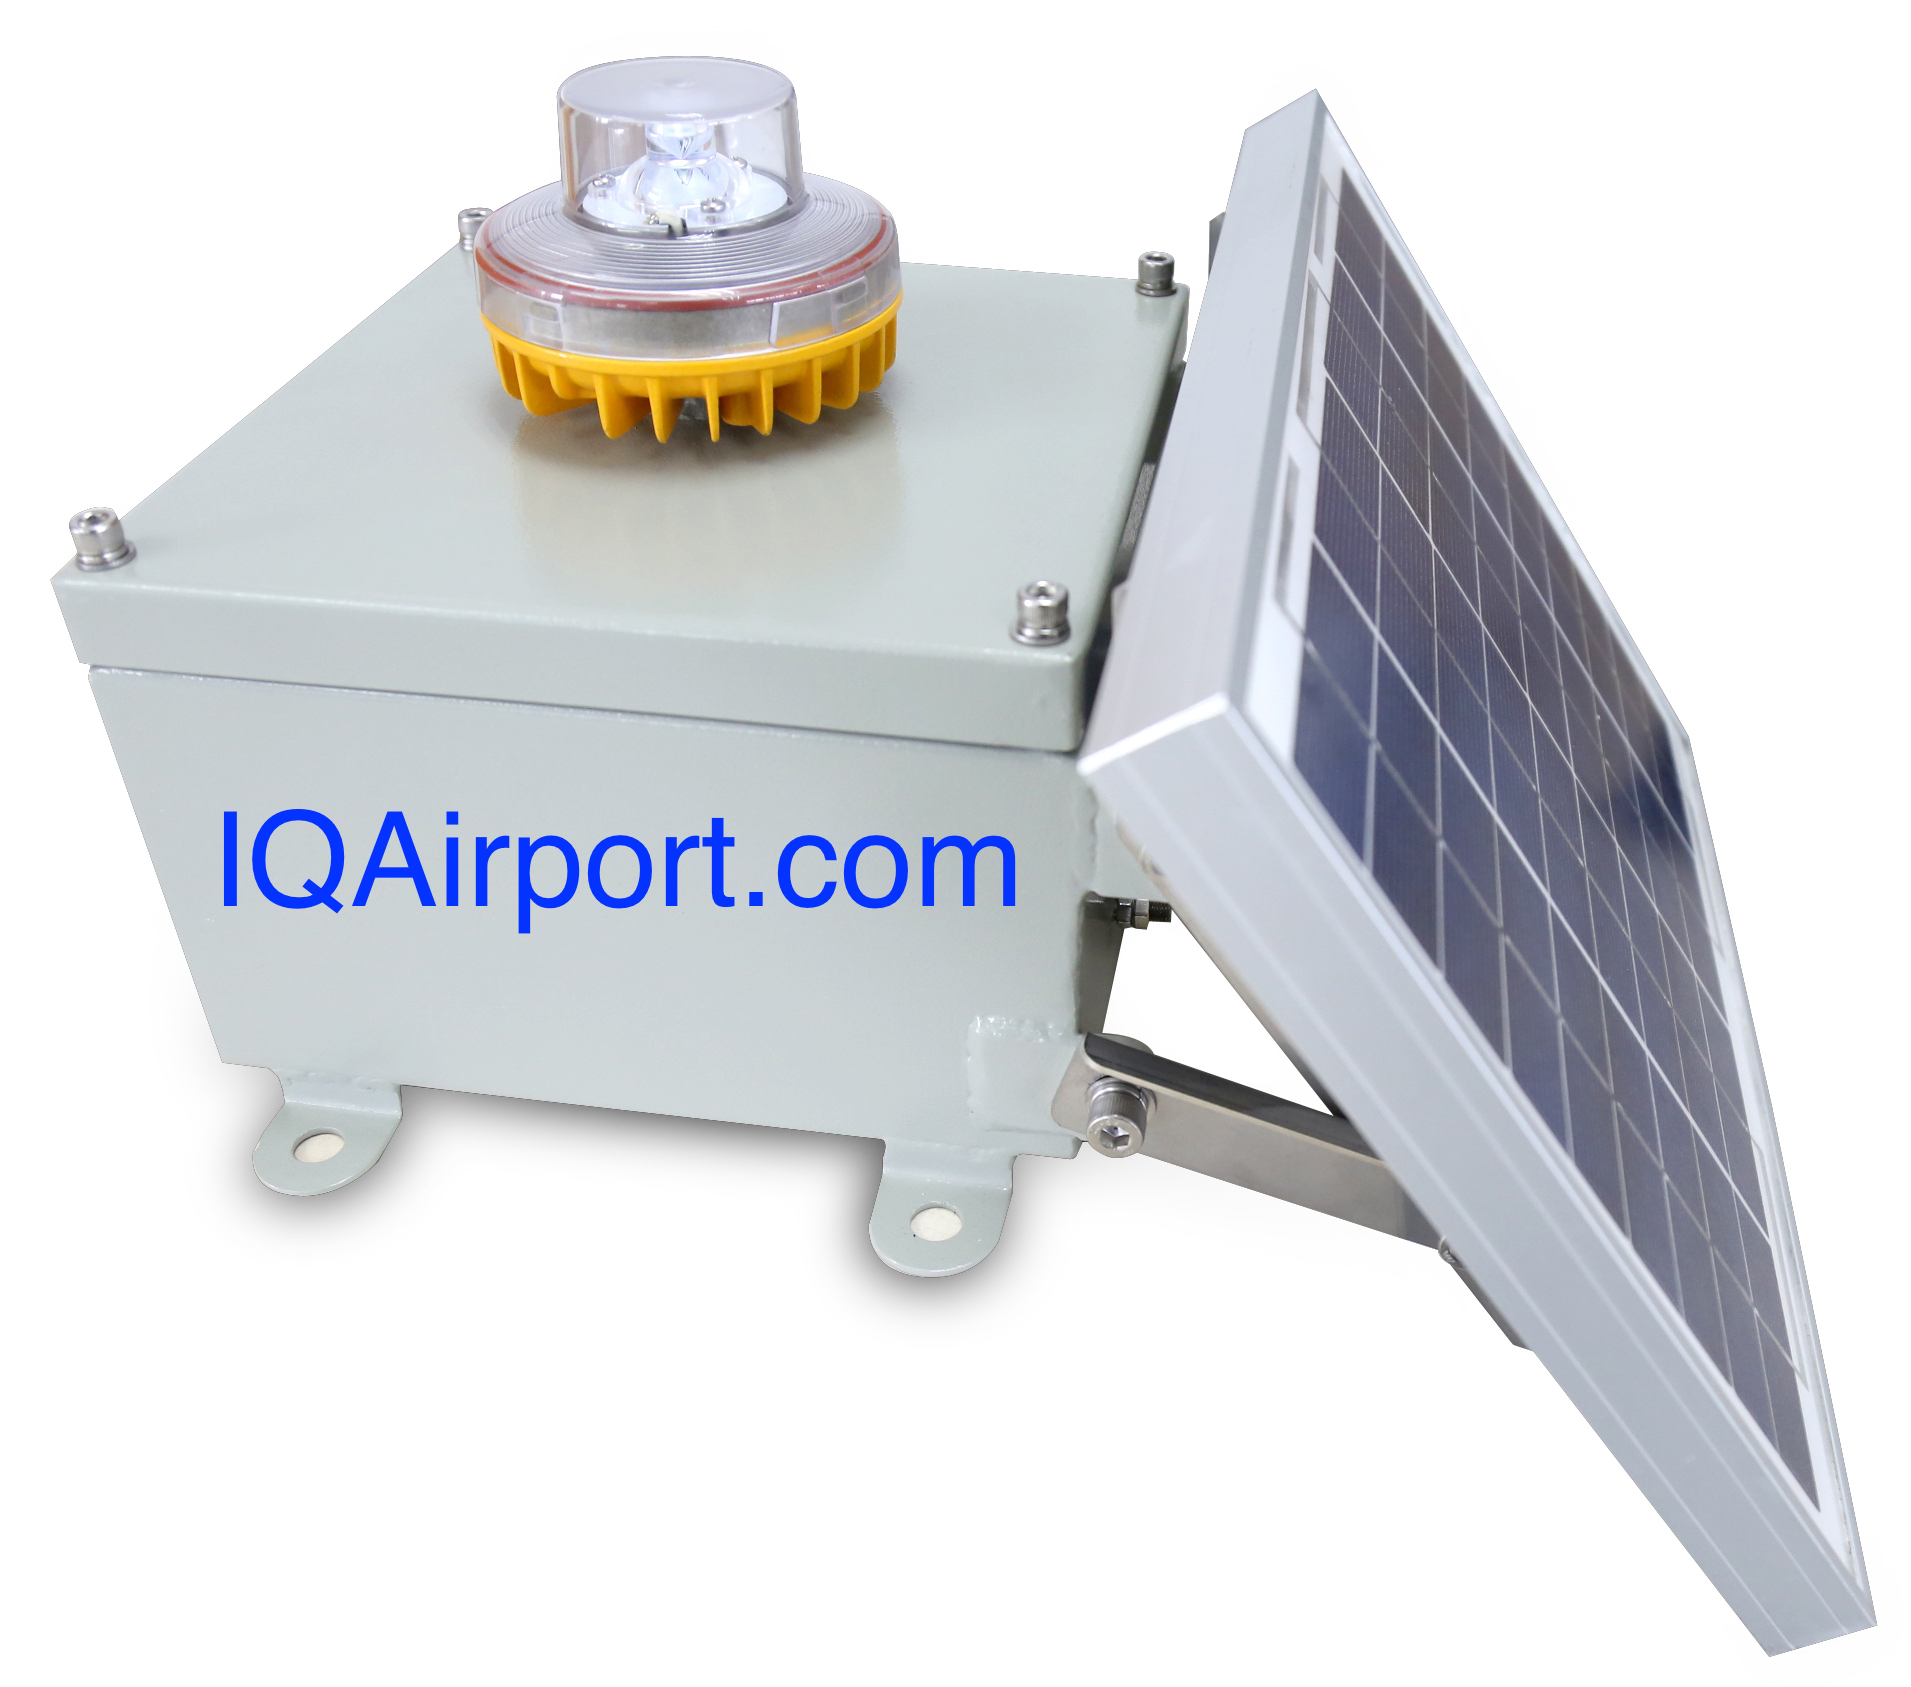 IQAirport.com Solar Obstruction Light Approved for FAA